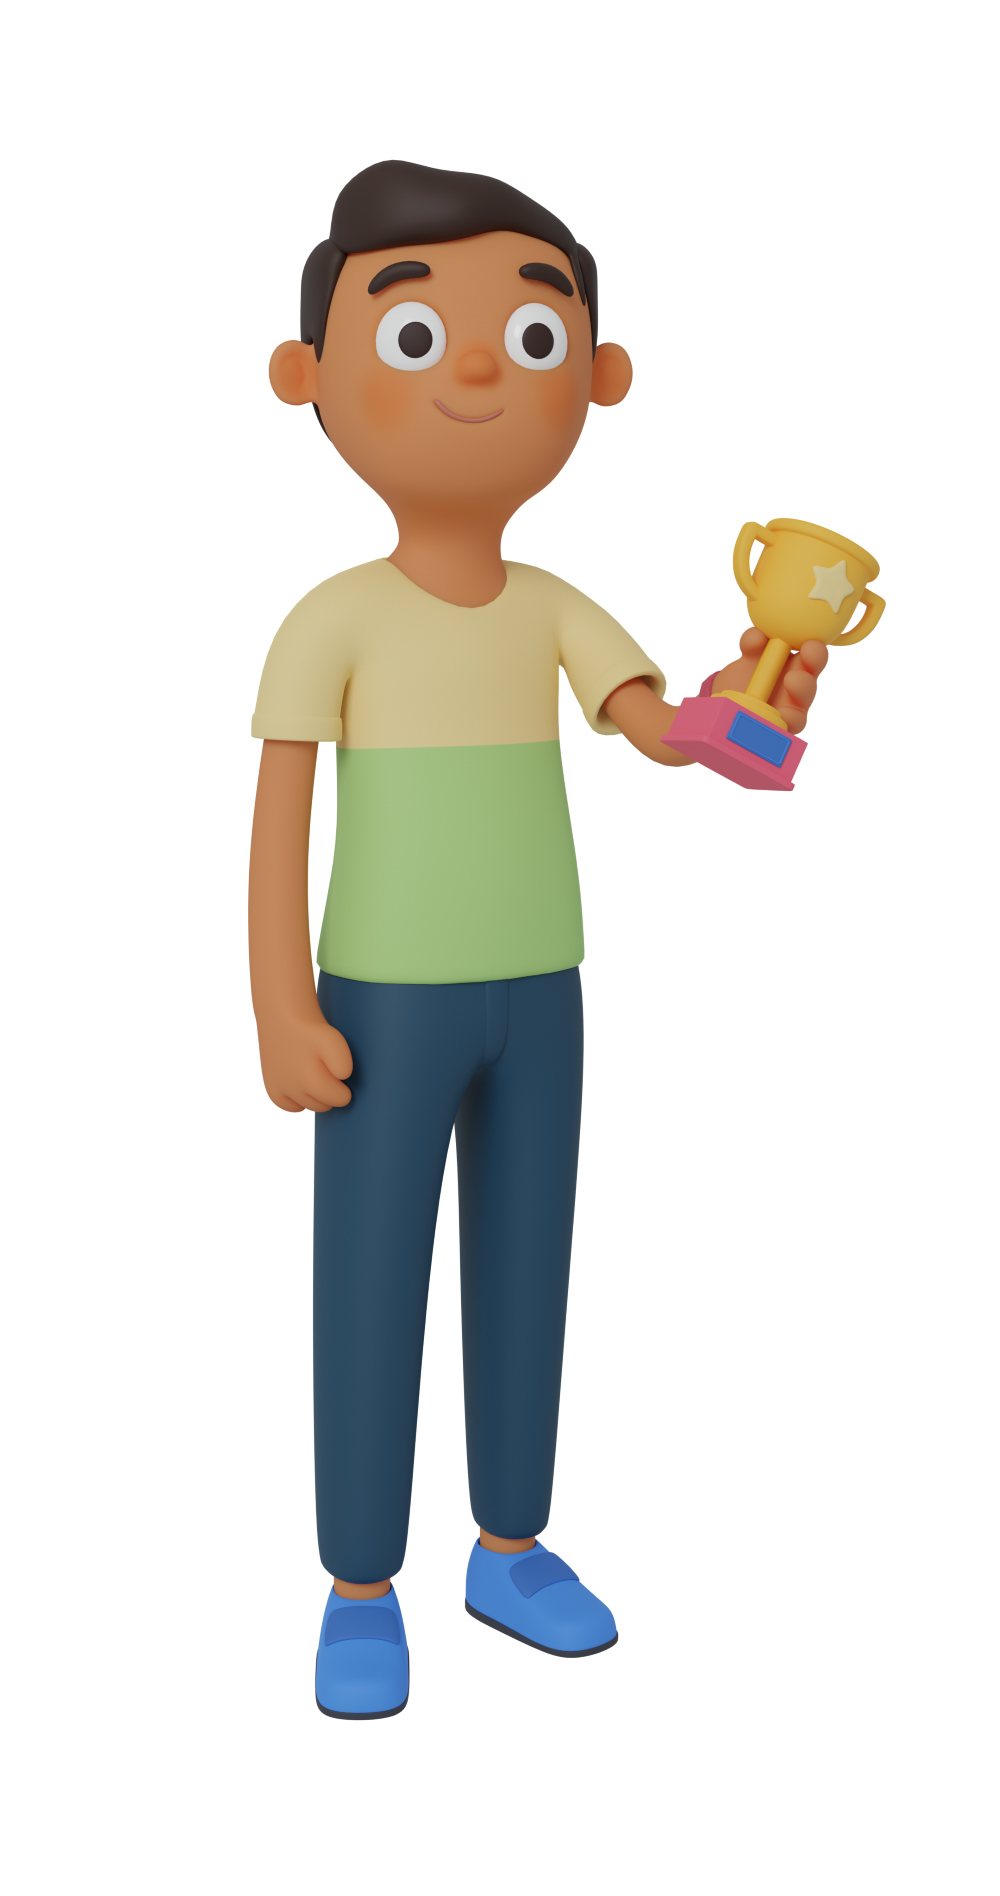 3d character design of a man holding a trophy or reward